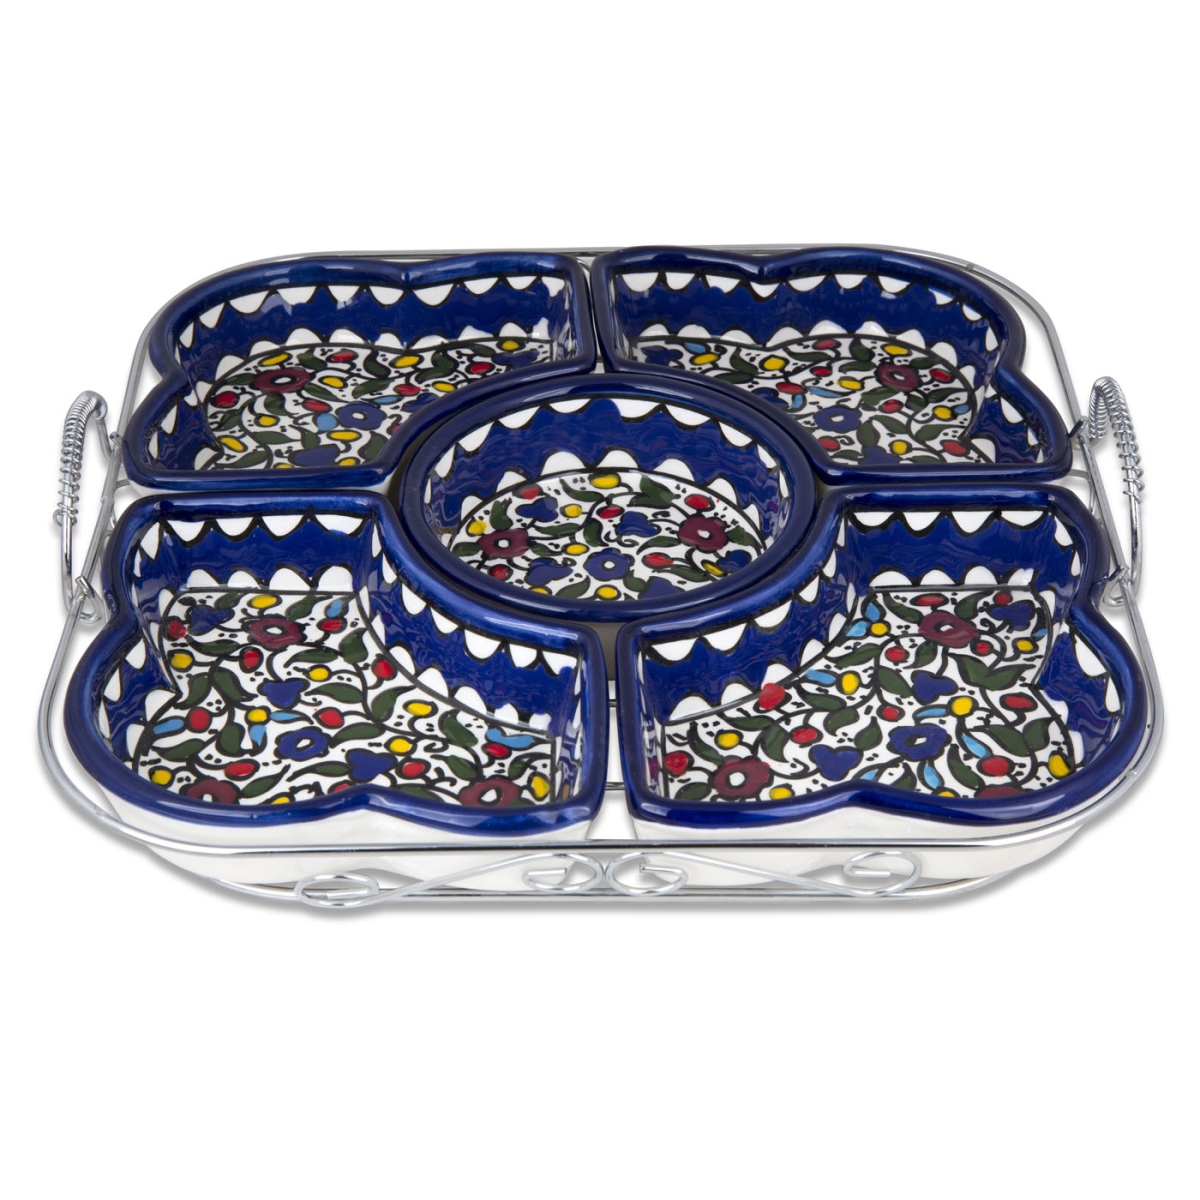 Armenian Ceramics 6 Piece Set of Serving Dishes in Metal Frame (Colorful Flowers) - 1